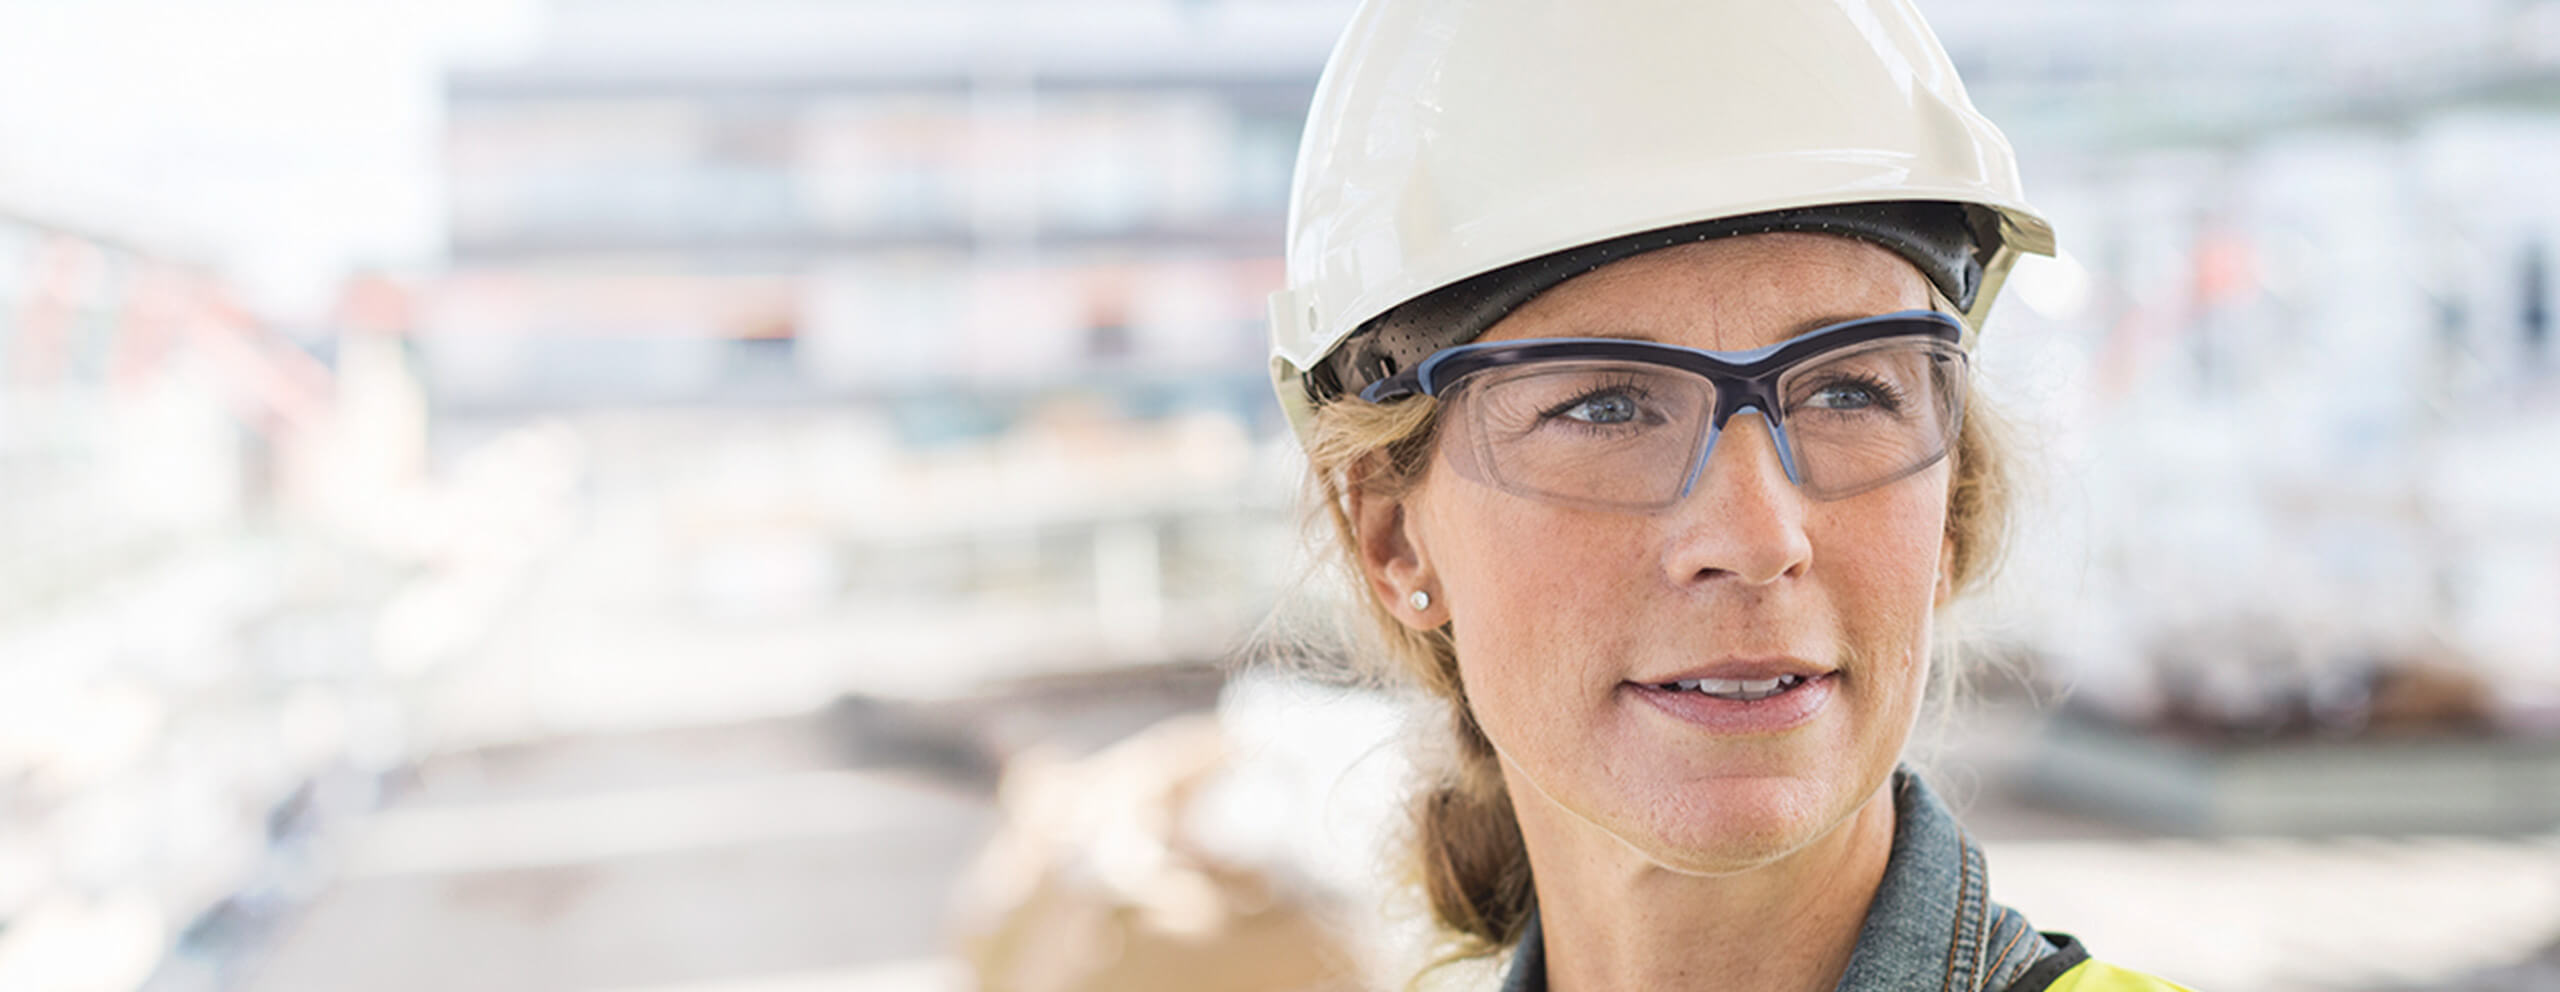 Construction worker wearing safety glasses